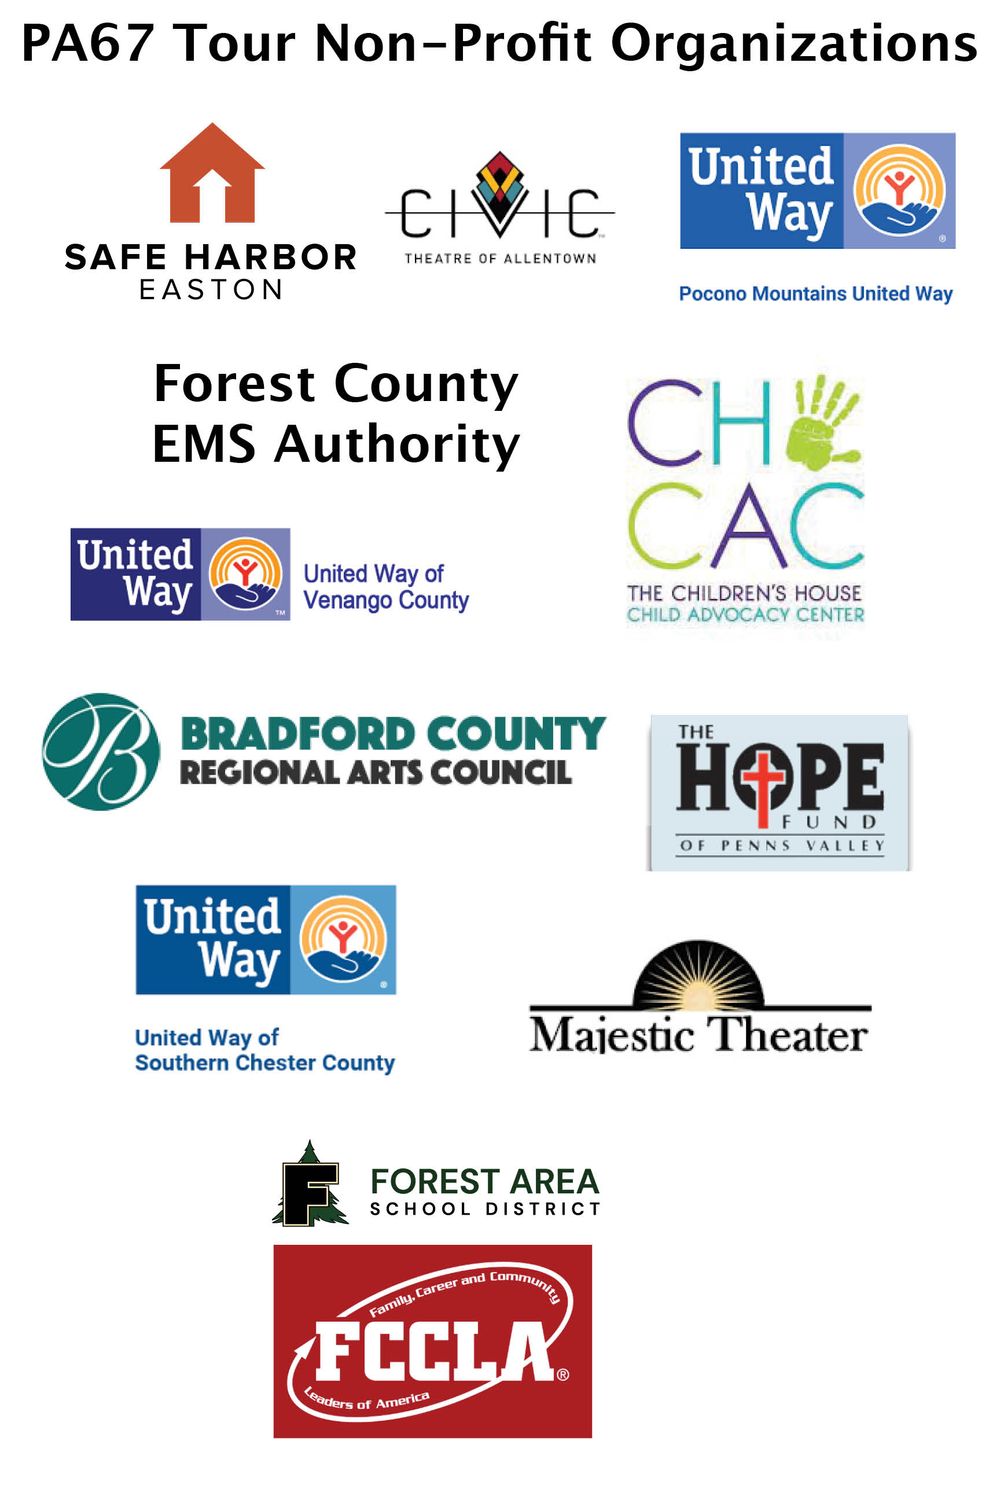 Lisa Bodnar and Whistlegrass supported these Non-profit organizations on their PA67 Tour of Pennsylvania Counties